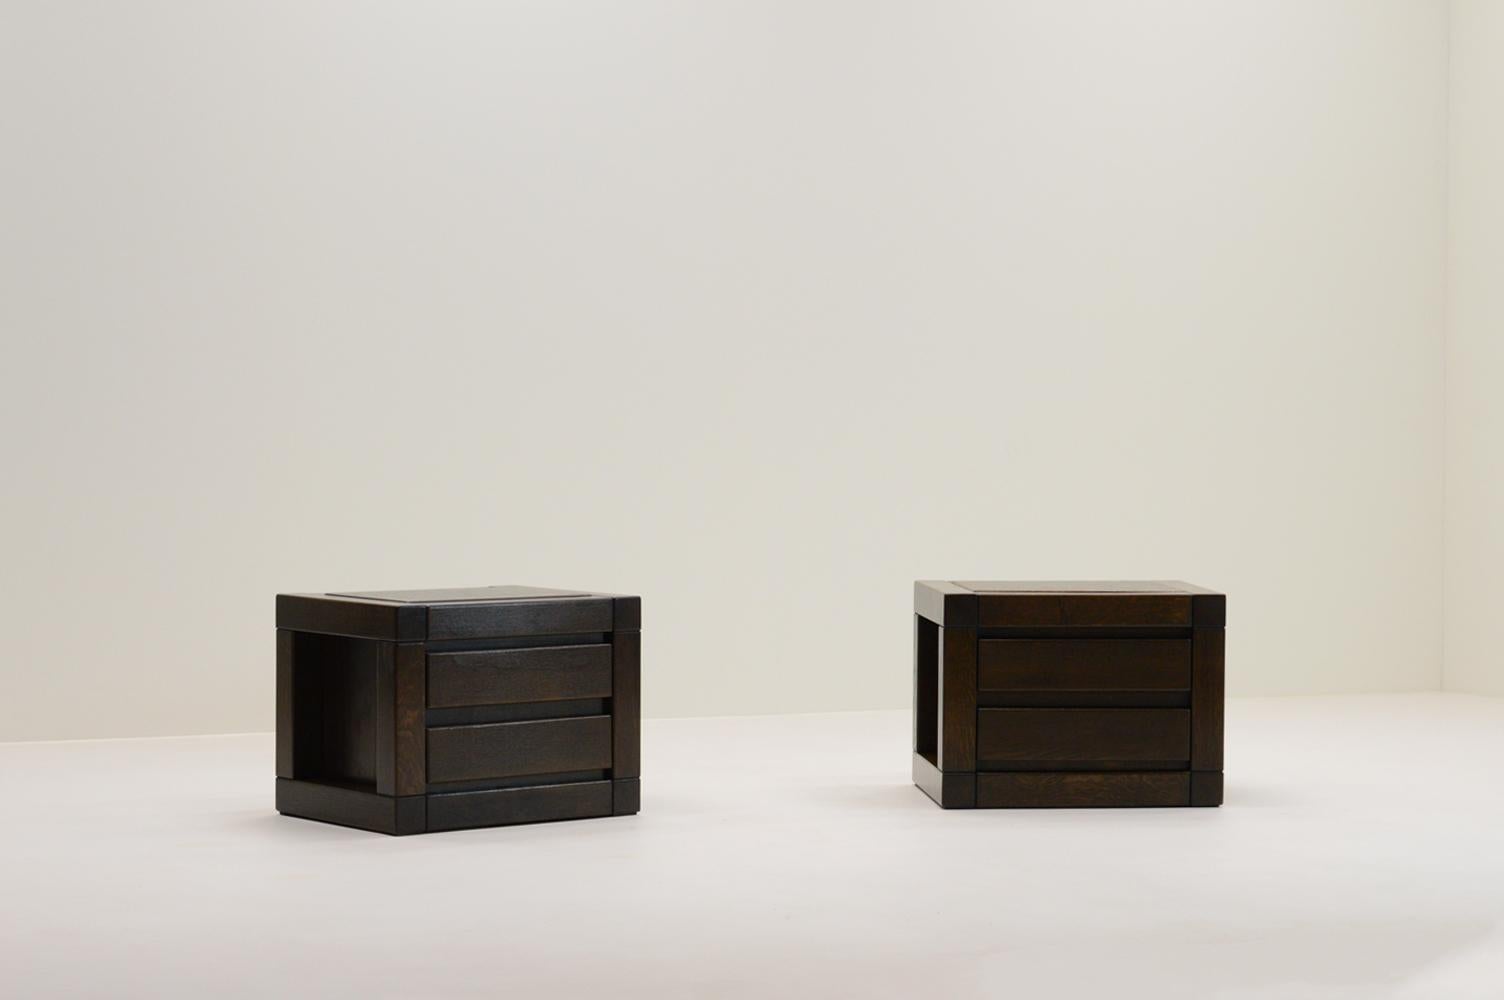 Set of 2 oak bedside drawer cabinets, 1970s Europe. This set is made of solid dark stained oak. A minimalistic brutalist design. Each cabinet has two drawers. Could also function as side tables. In good vintage condition. 

Request a quote for the